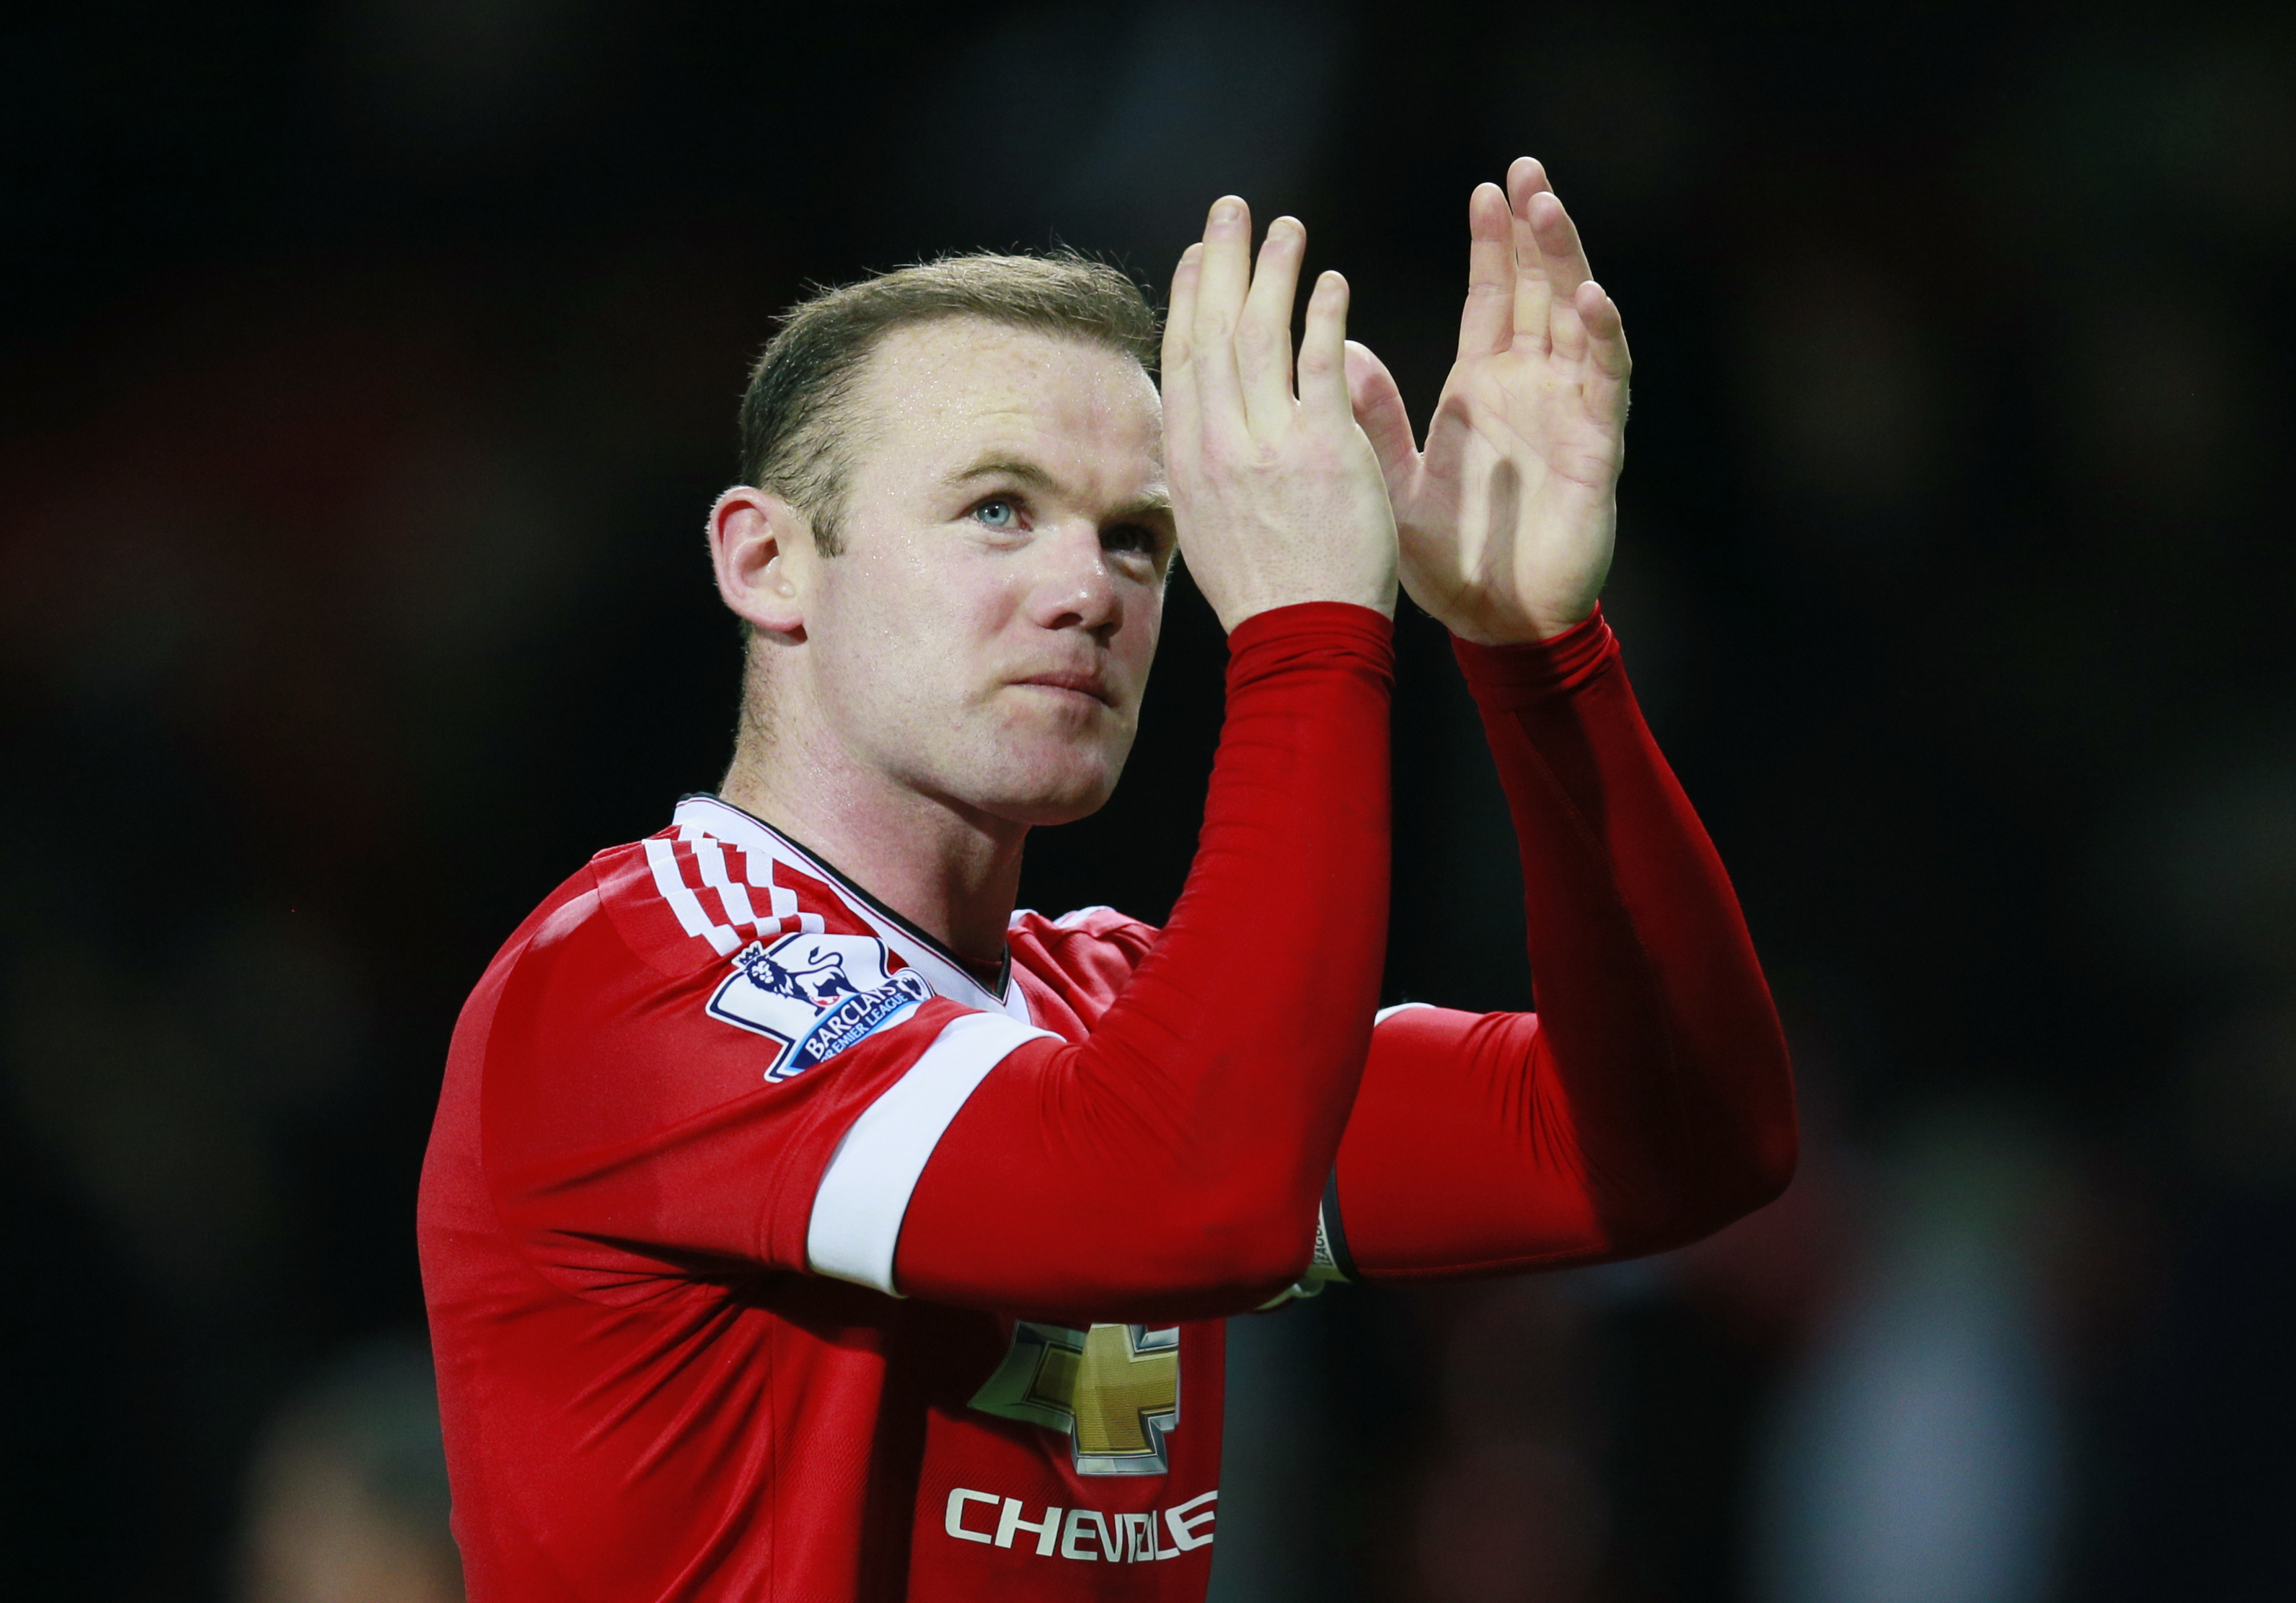 Manchester United's Wayne Rooney applauds their fans as he looks dejected after the game against Chelsea at Old Trafford on Monday, December 28, 2015. Photo: Reuters